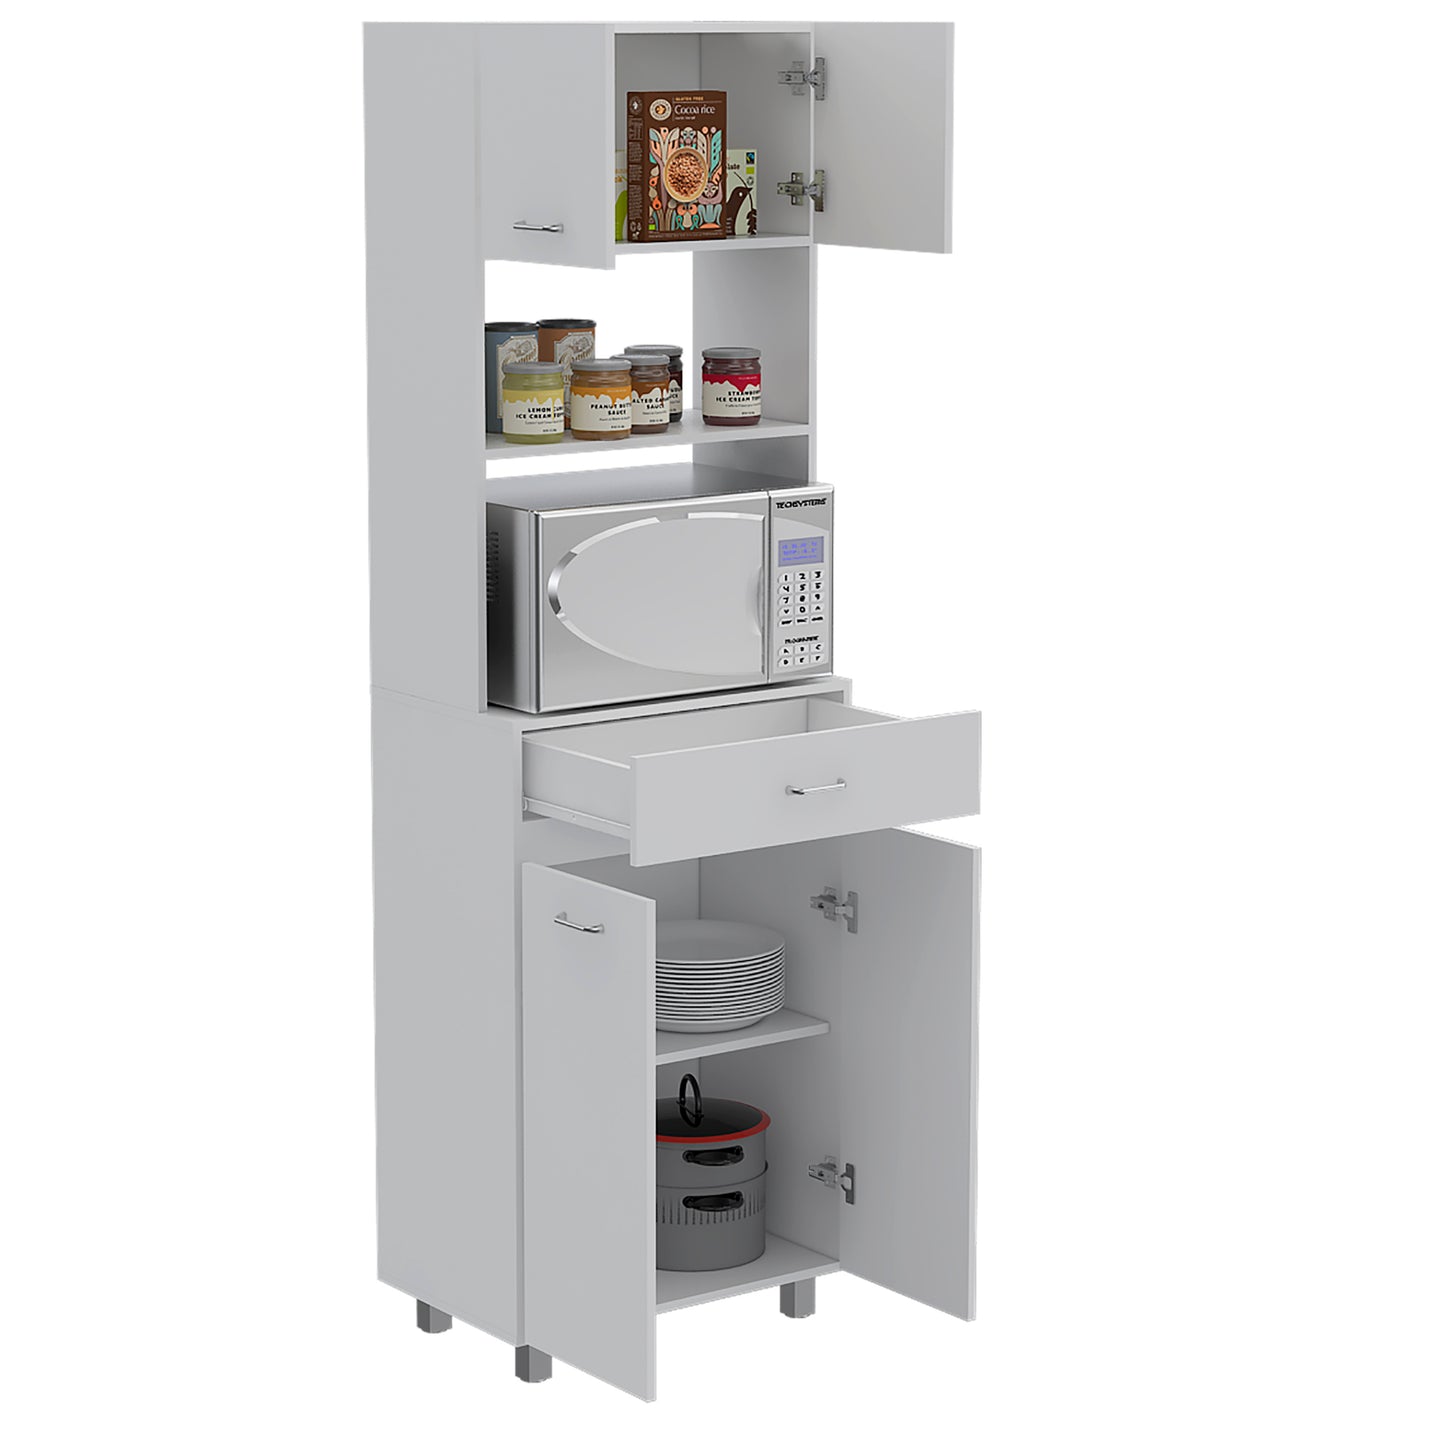 Caribe Microwave Cabinet - White